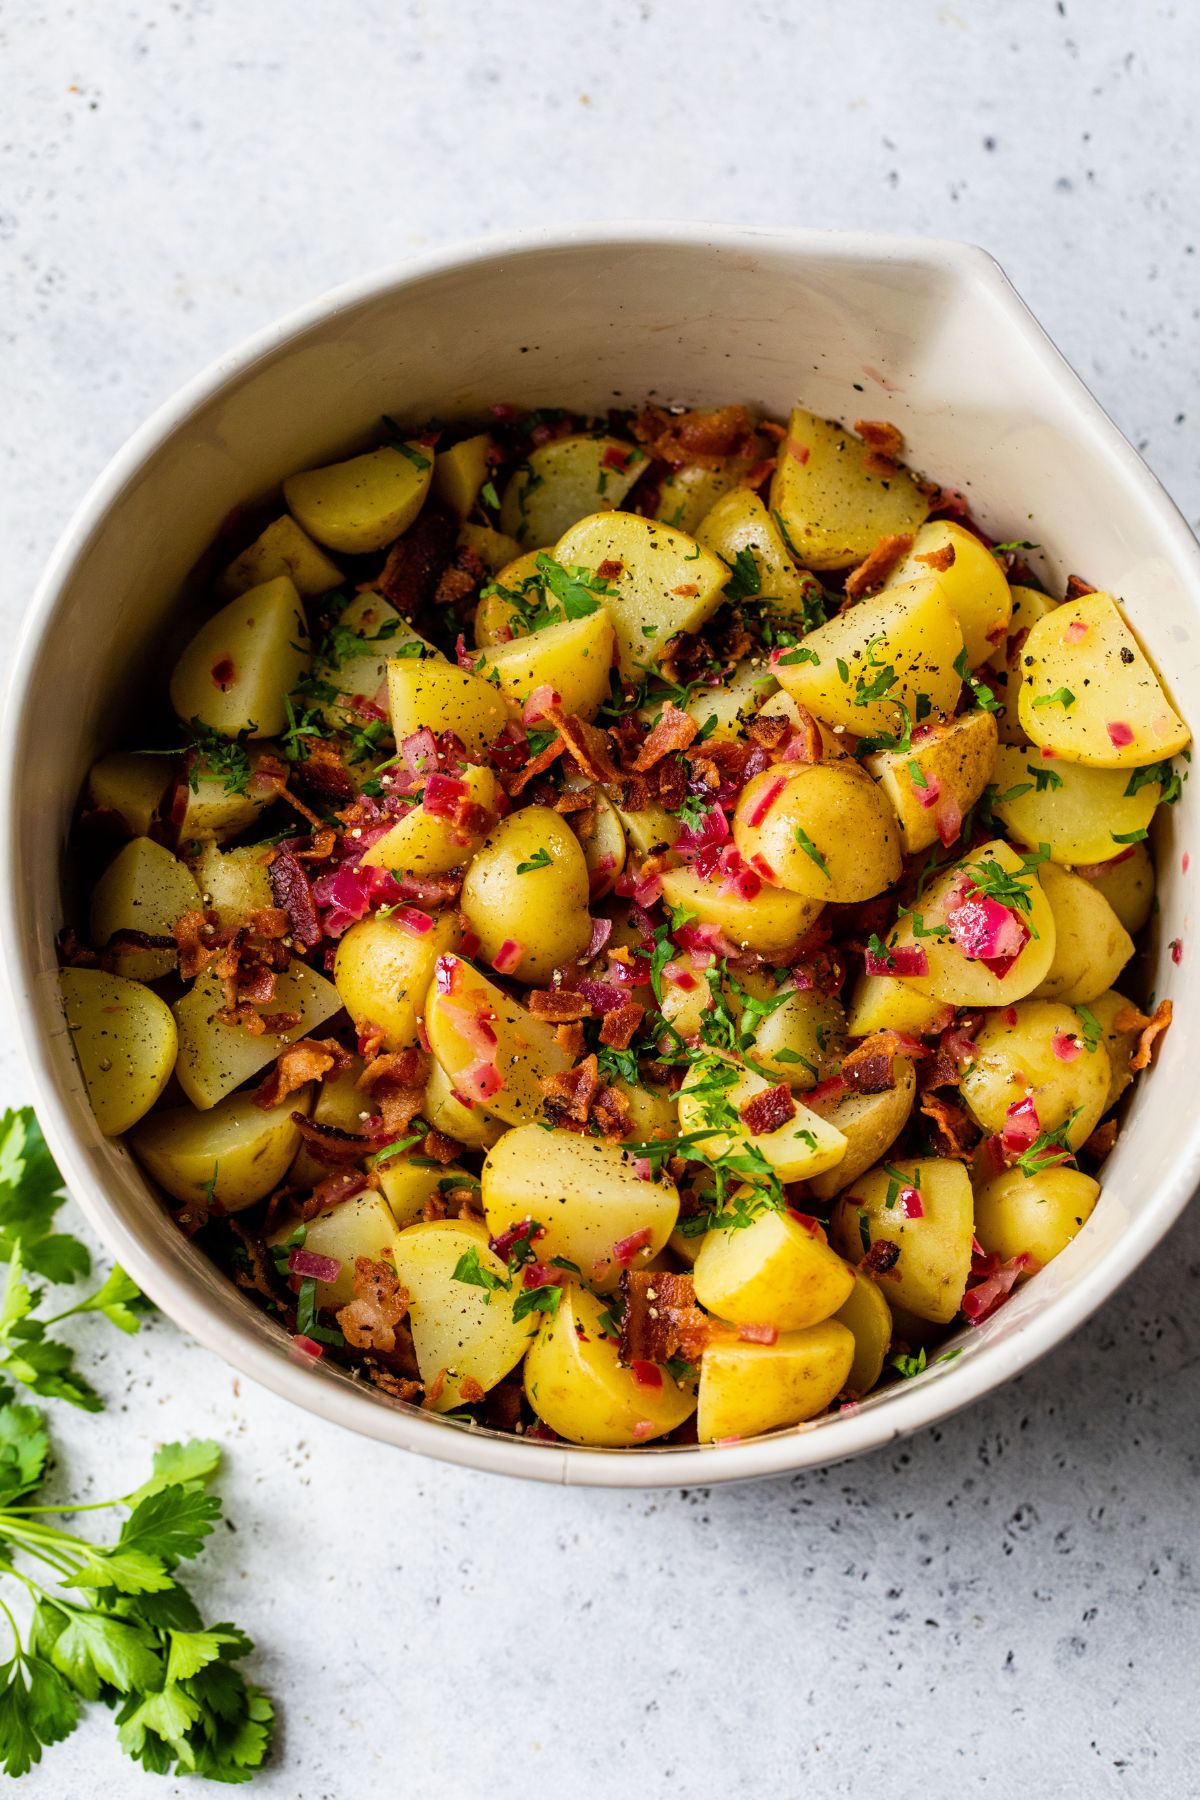 Tossing potatoes with dressing, bacon and parsley.